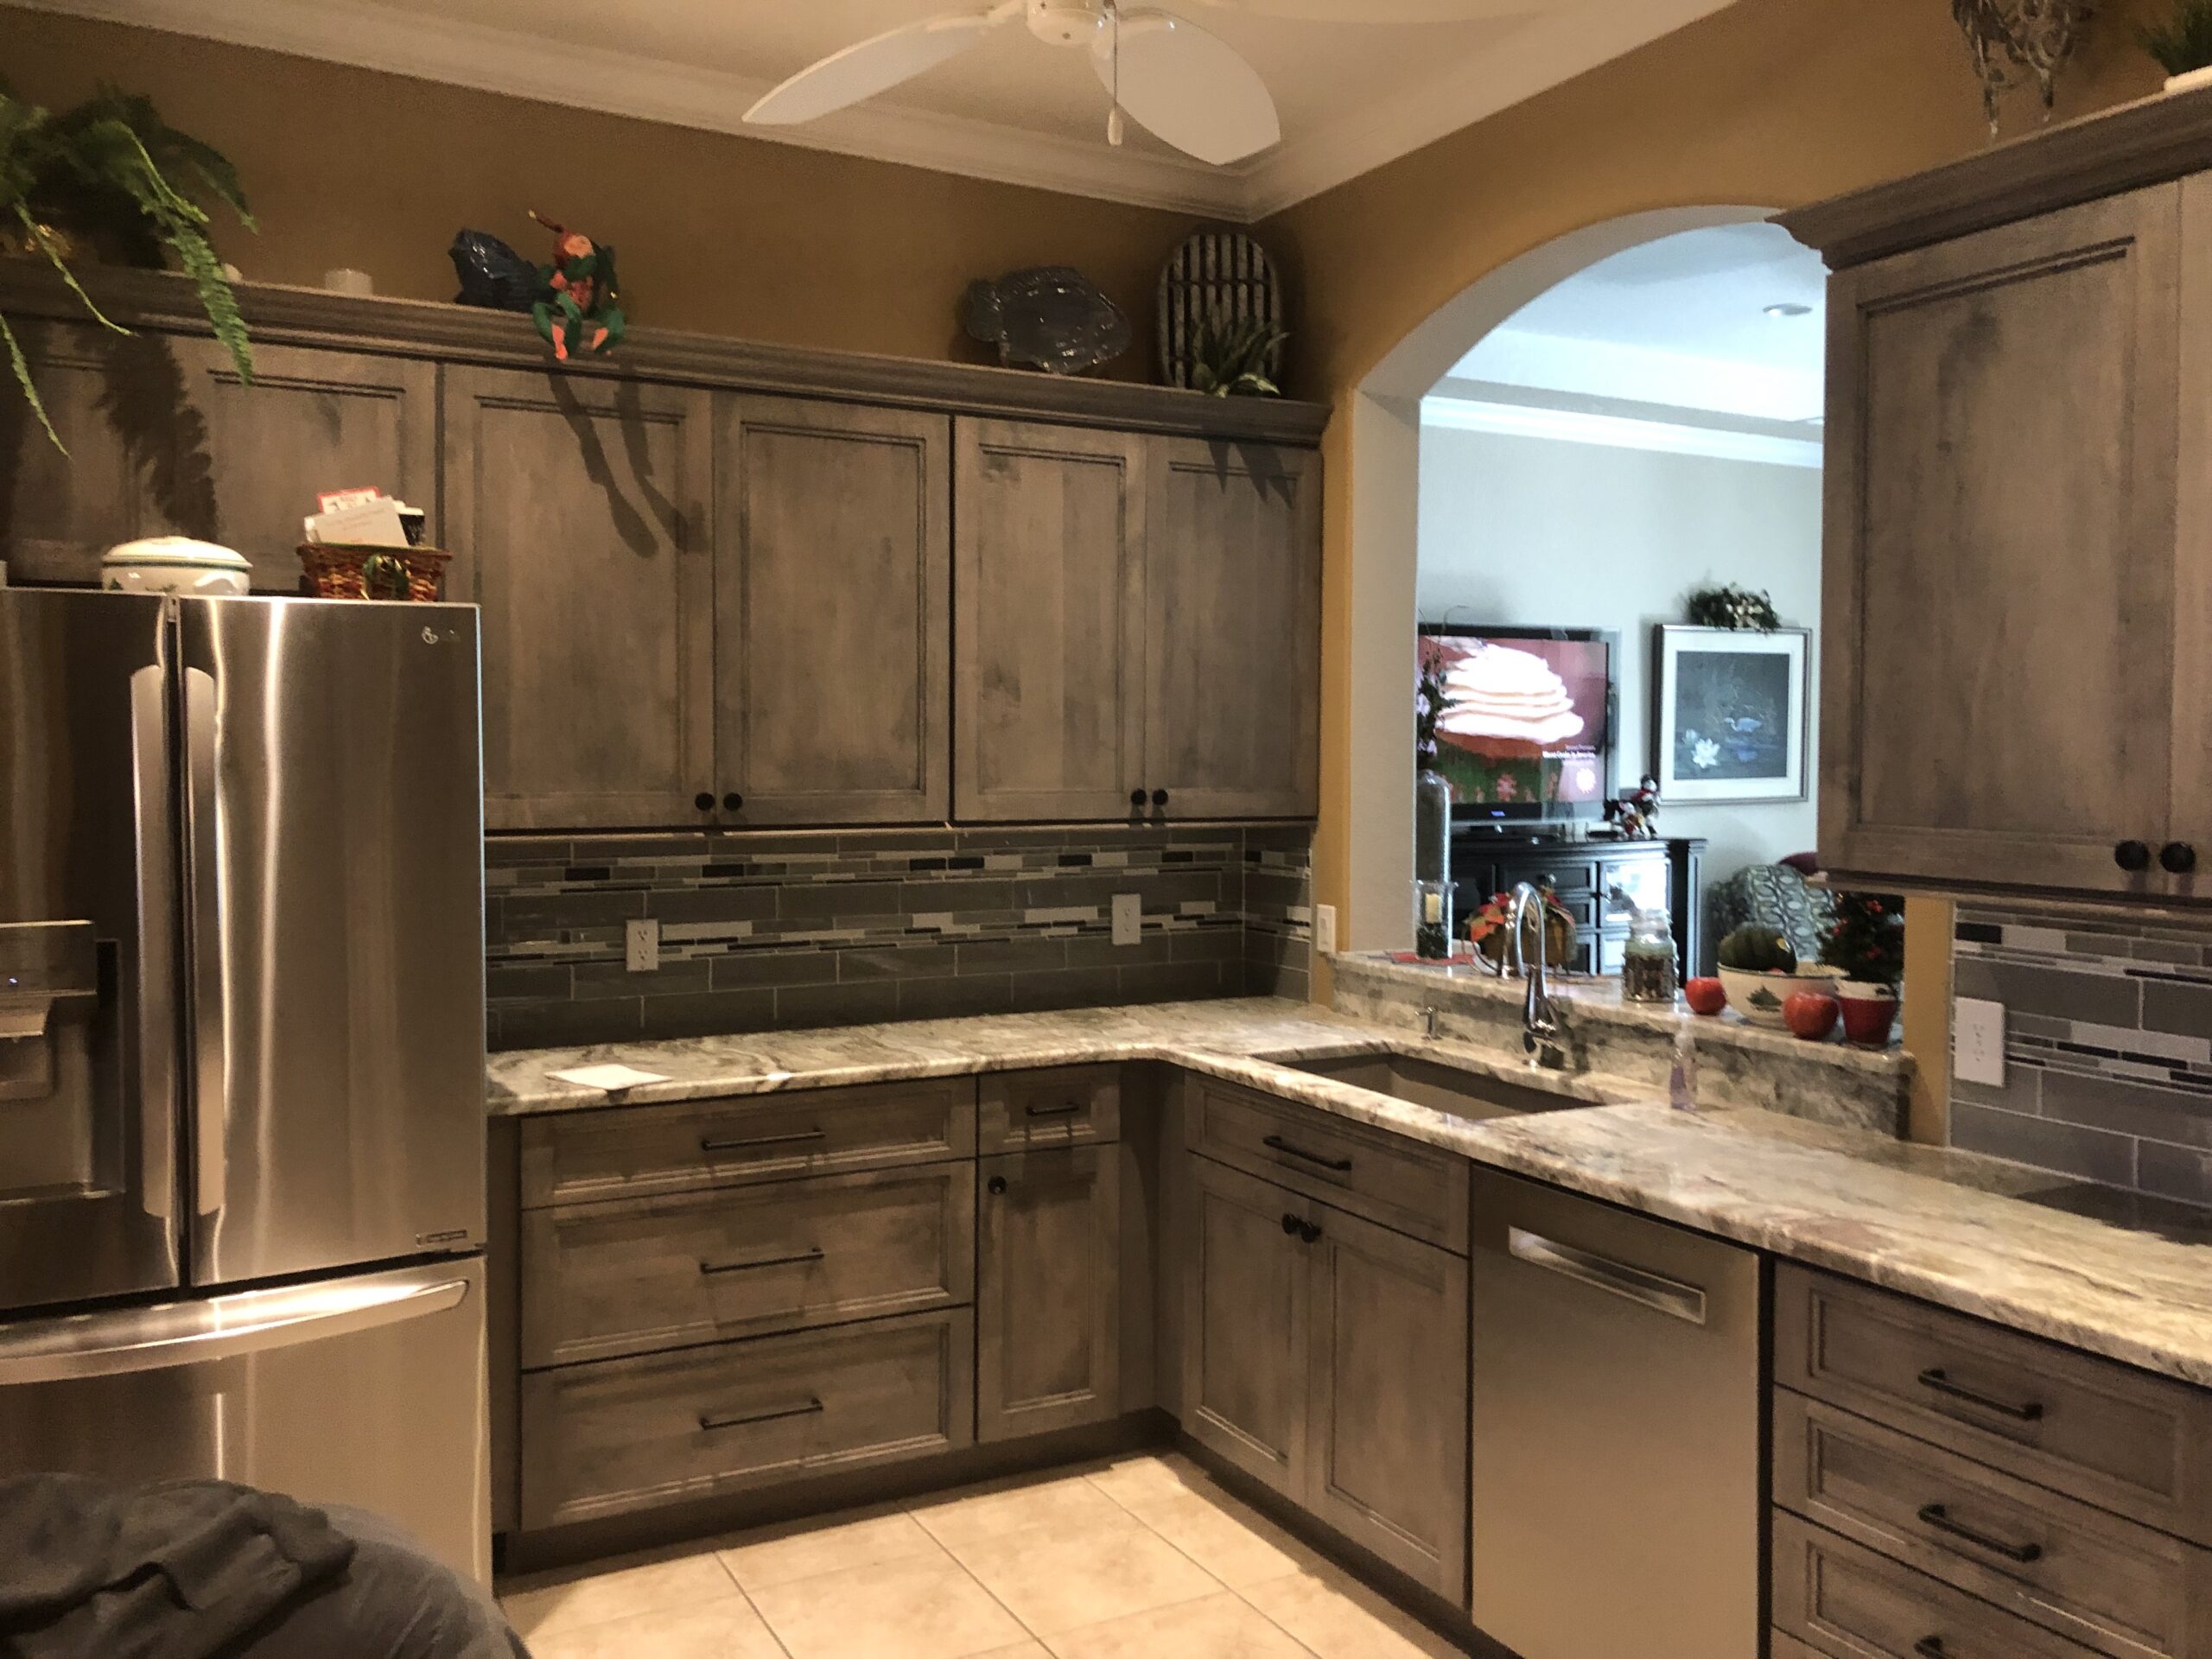 Modern, Stylish, and High Quality Stained Cherry Kitchen Cabinet Refacing in Holiday